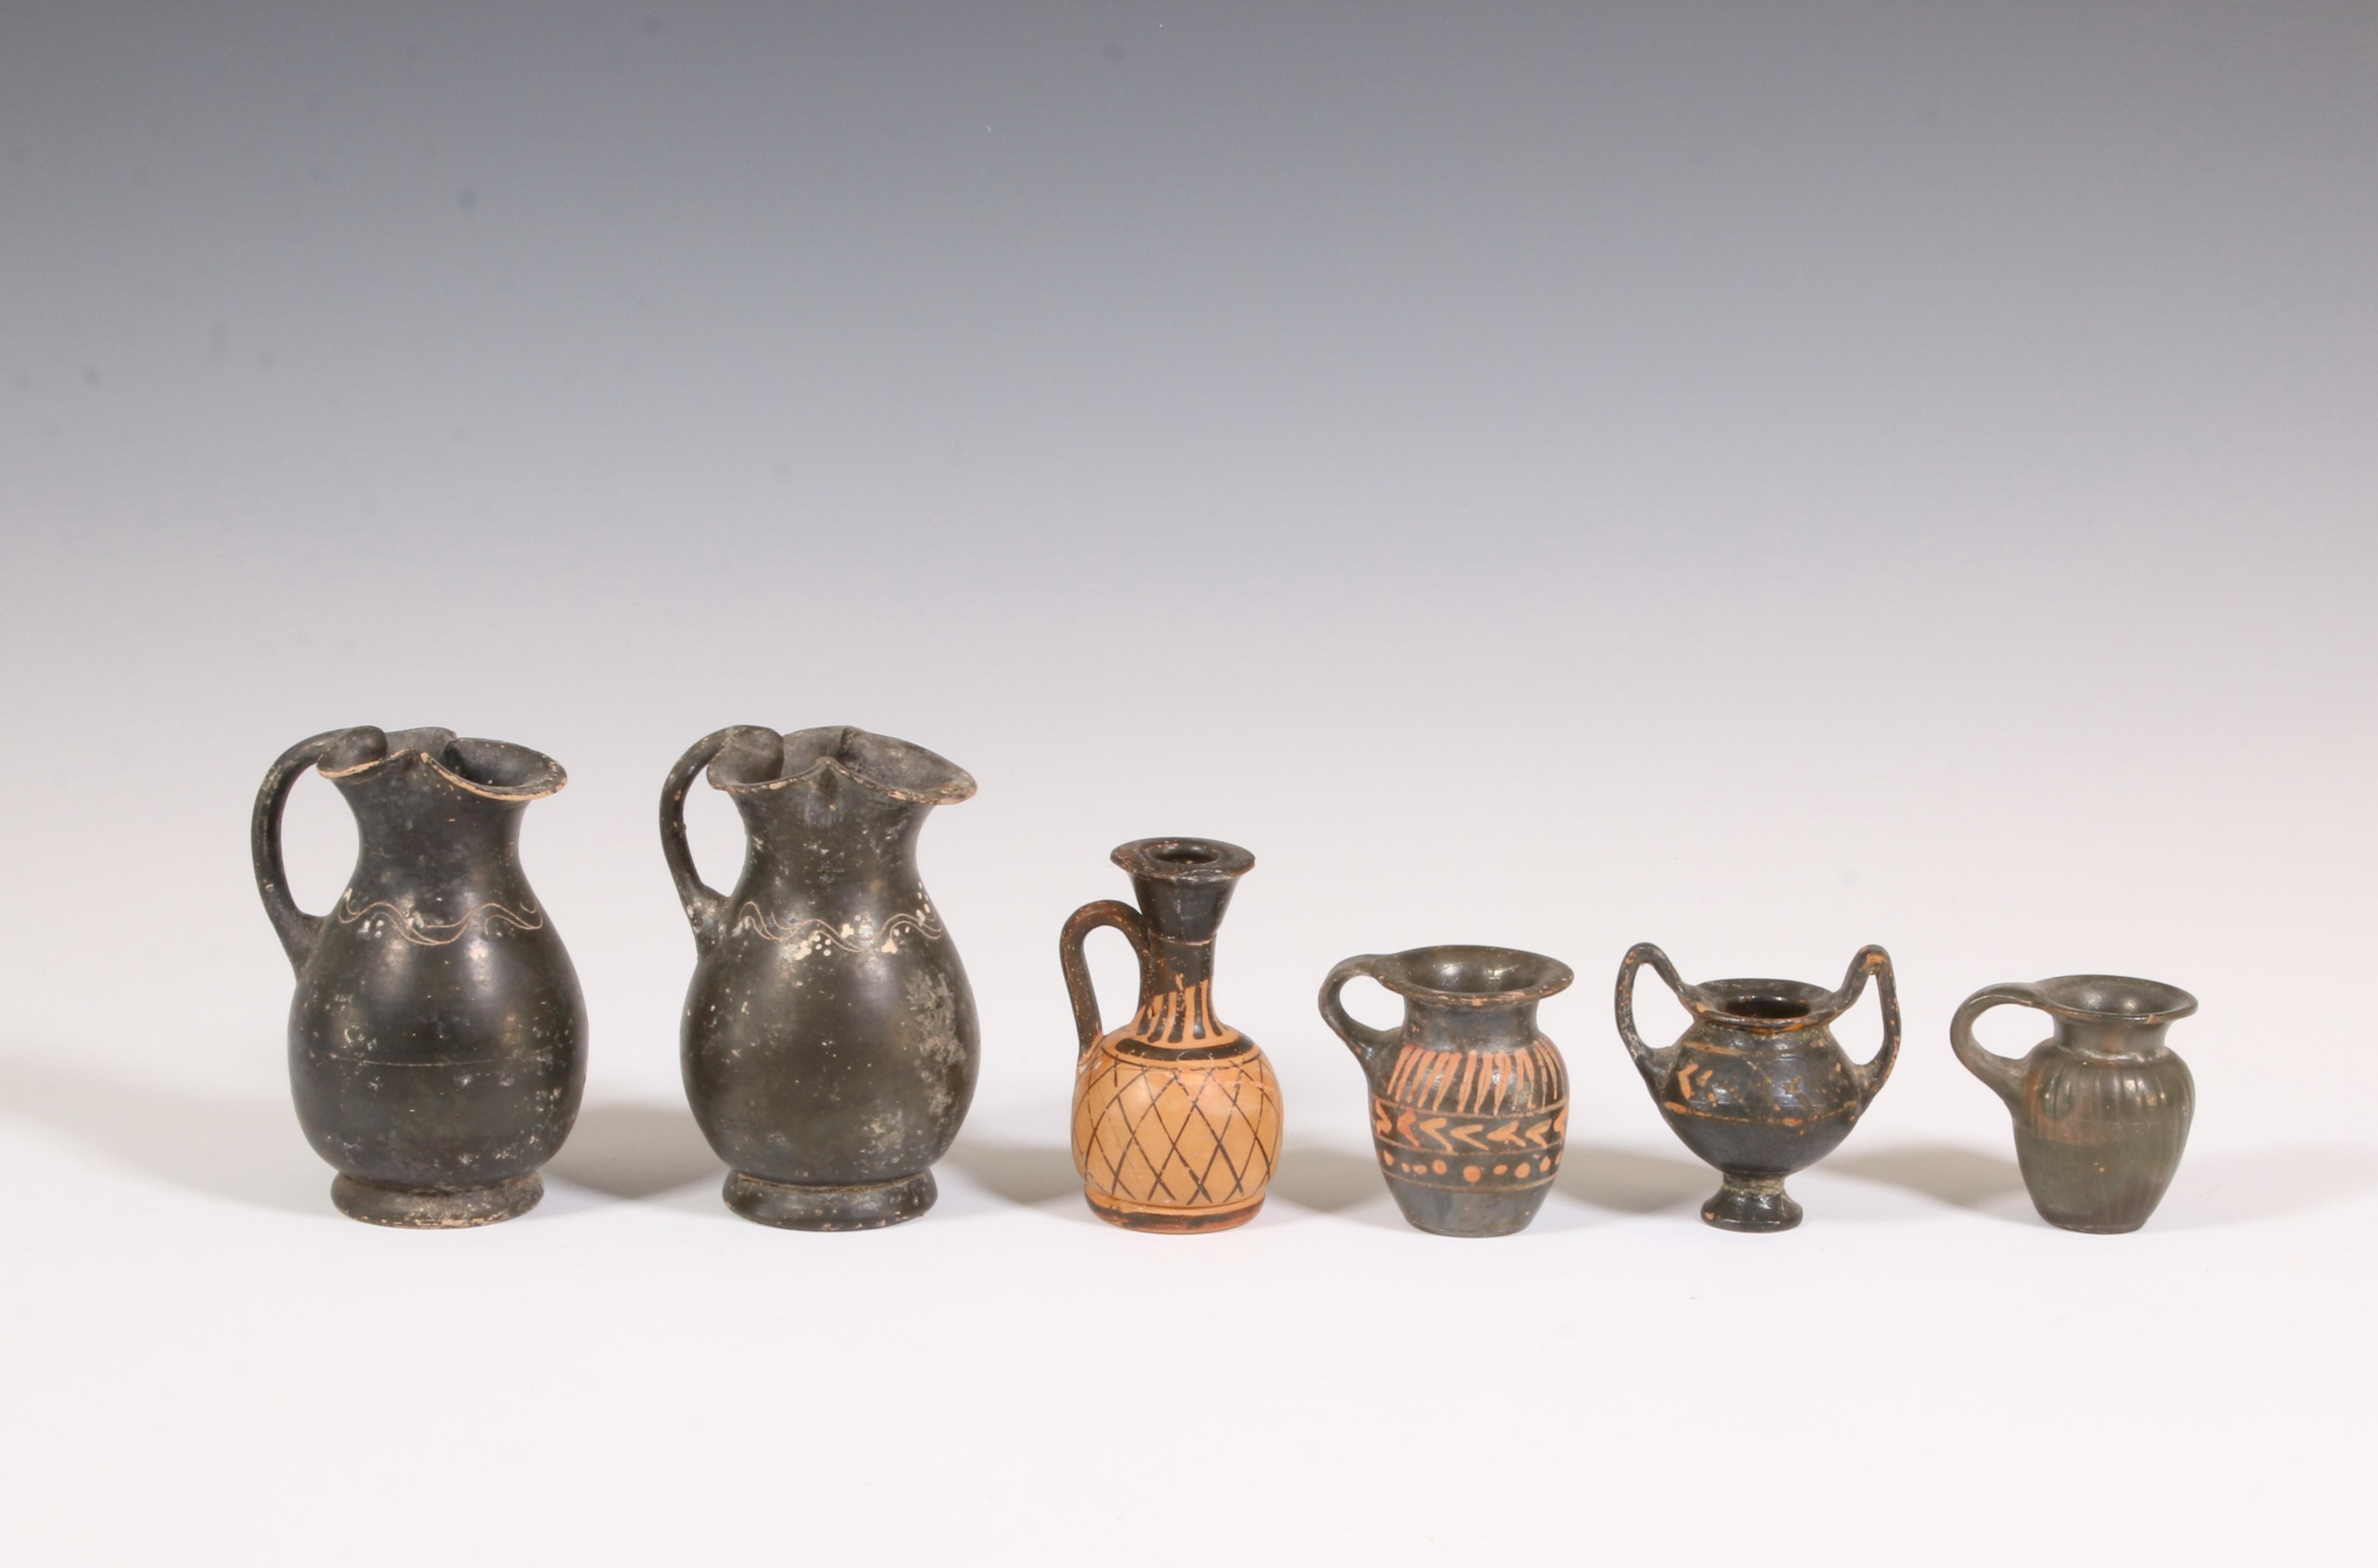 A collection of various Apulian earthenware vases and small pots, 4th century BC; - Image 2 of 2